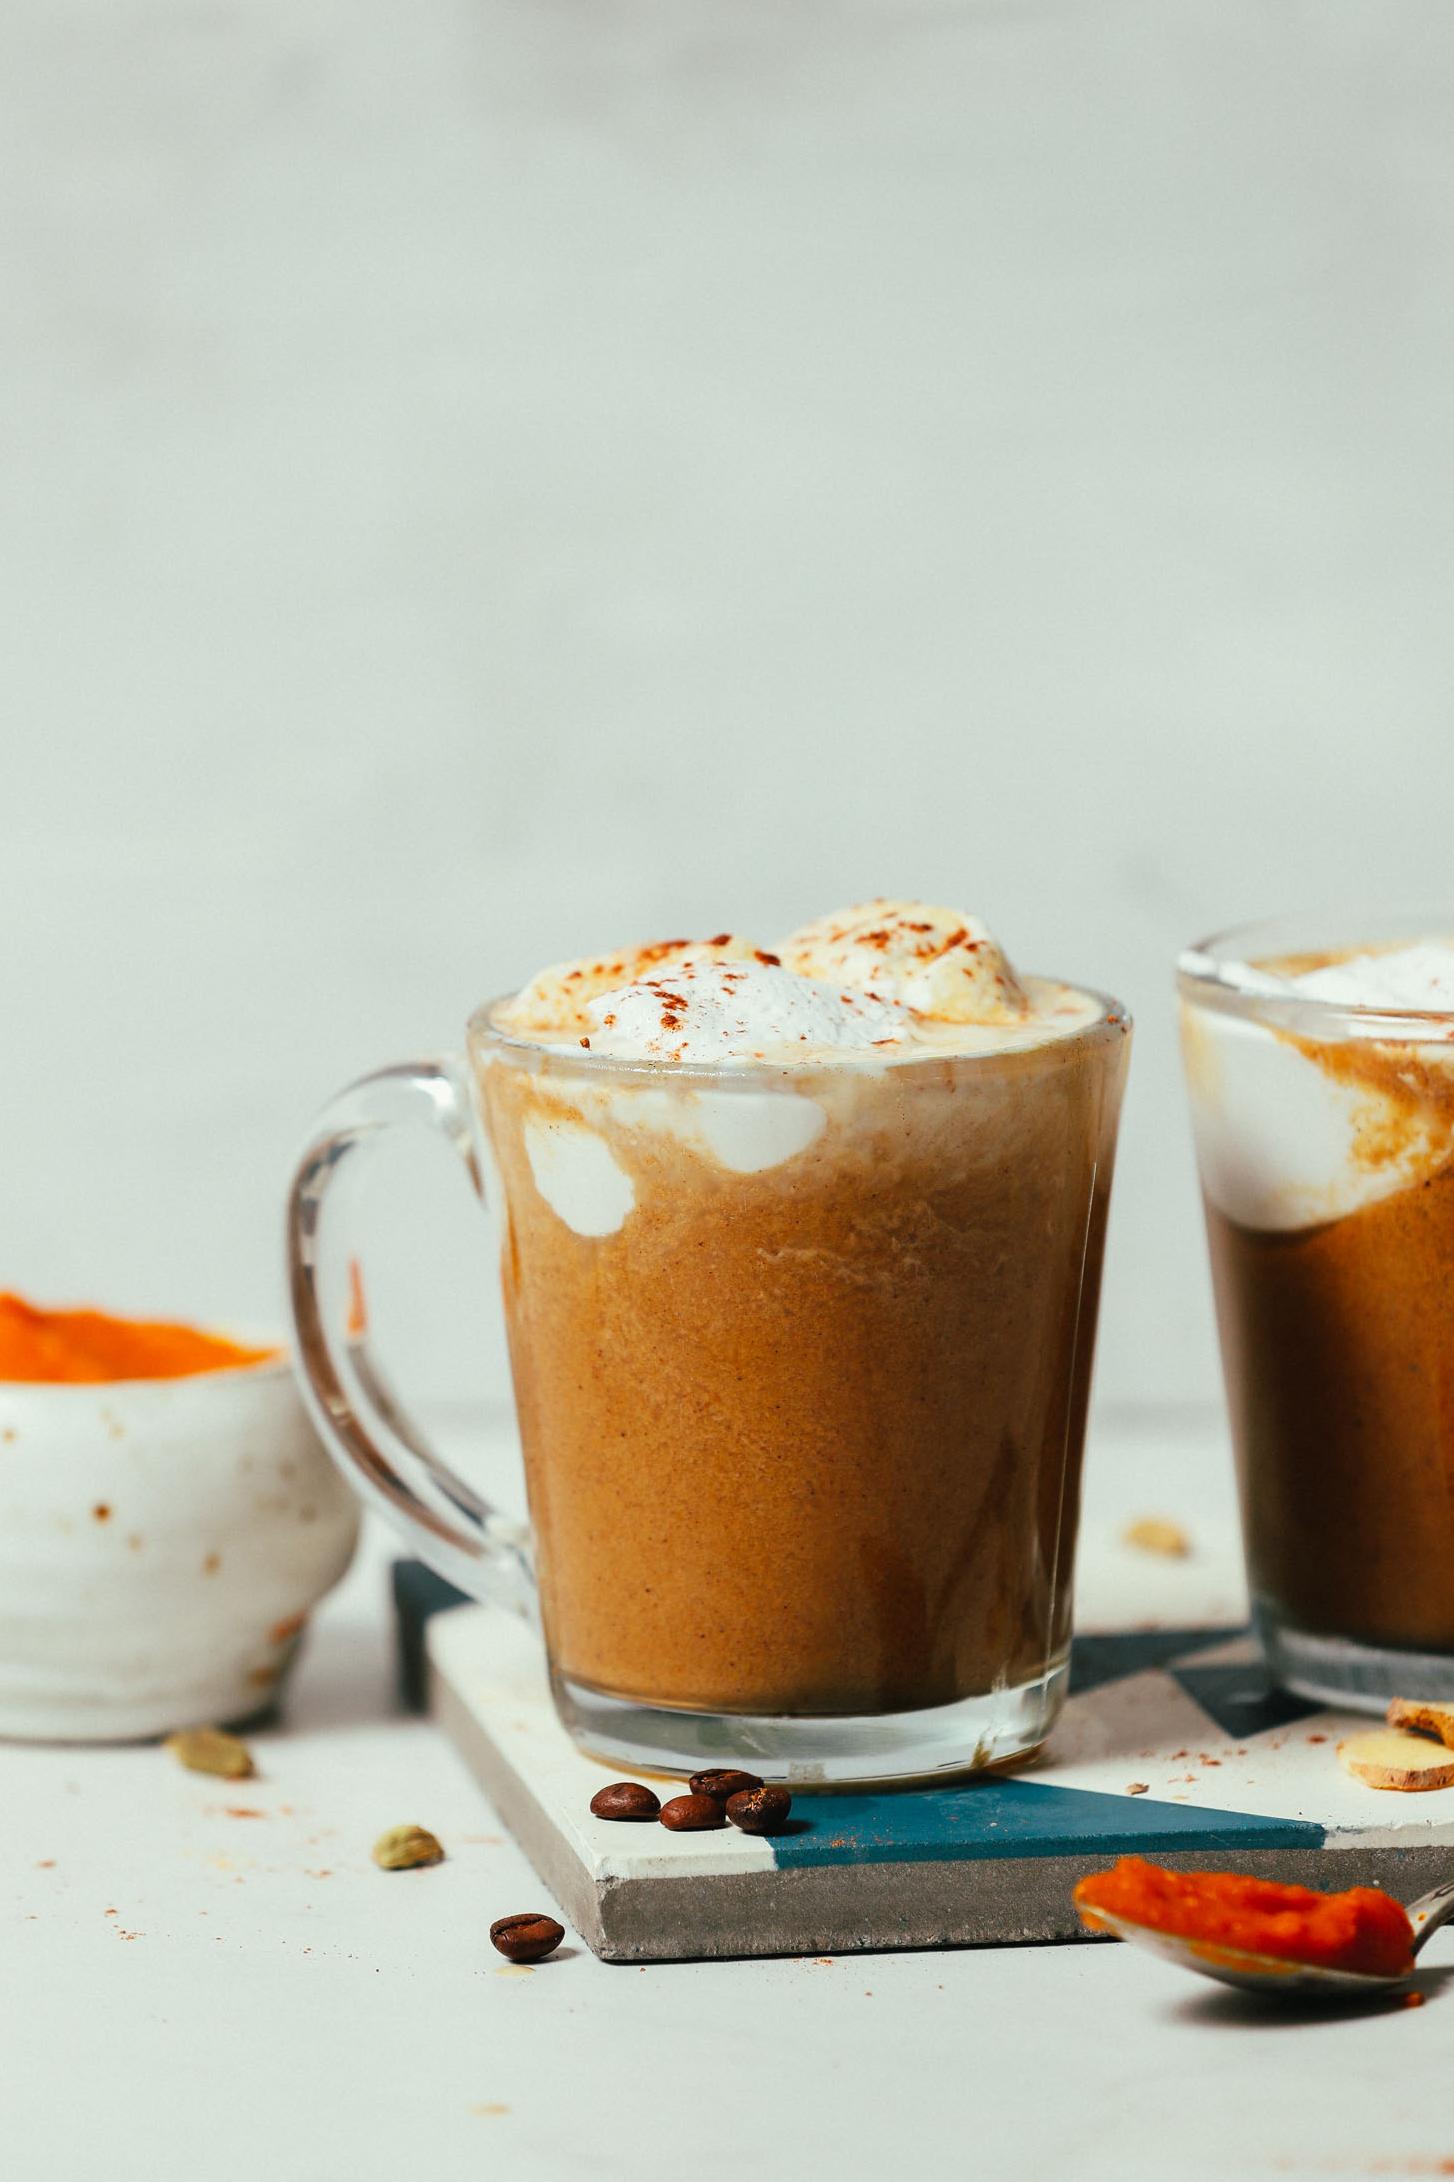  Who needs a dessert when you can have a cup of creamy pumpkin coffee?